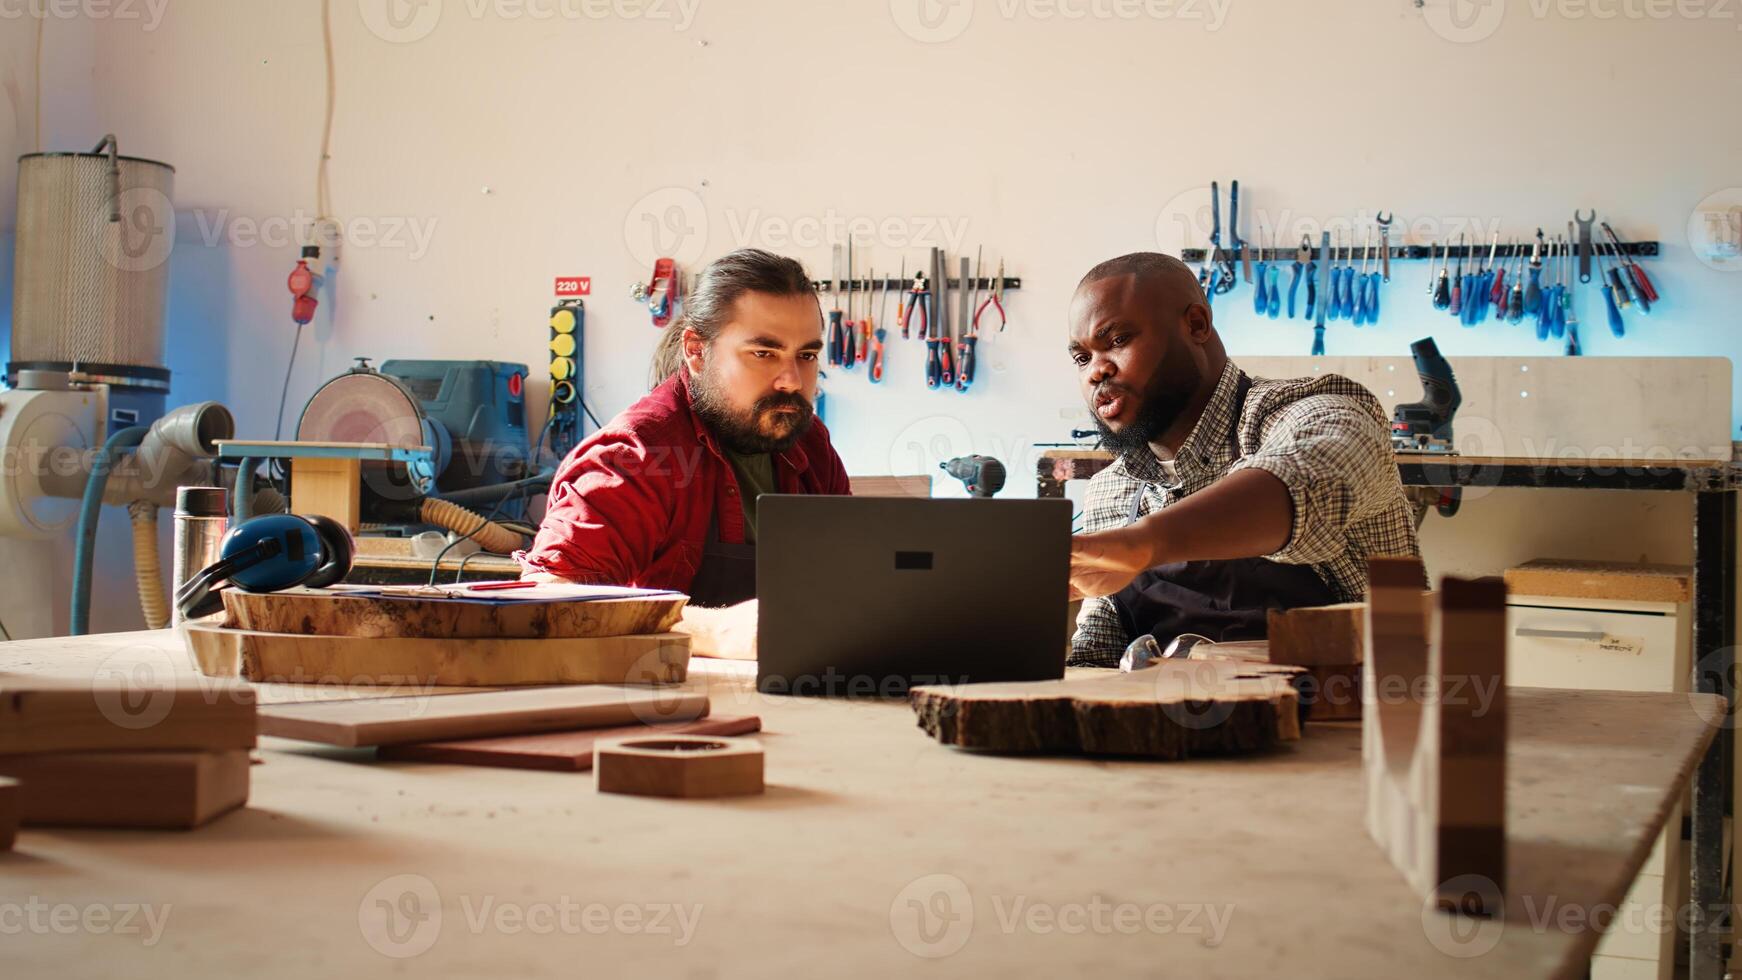 Woodworkers using CAD software on laptop to design wooden objects, pointing towards screen. Carpenters using program on notebook to help them do furniture assembling in joinery, camera B photo